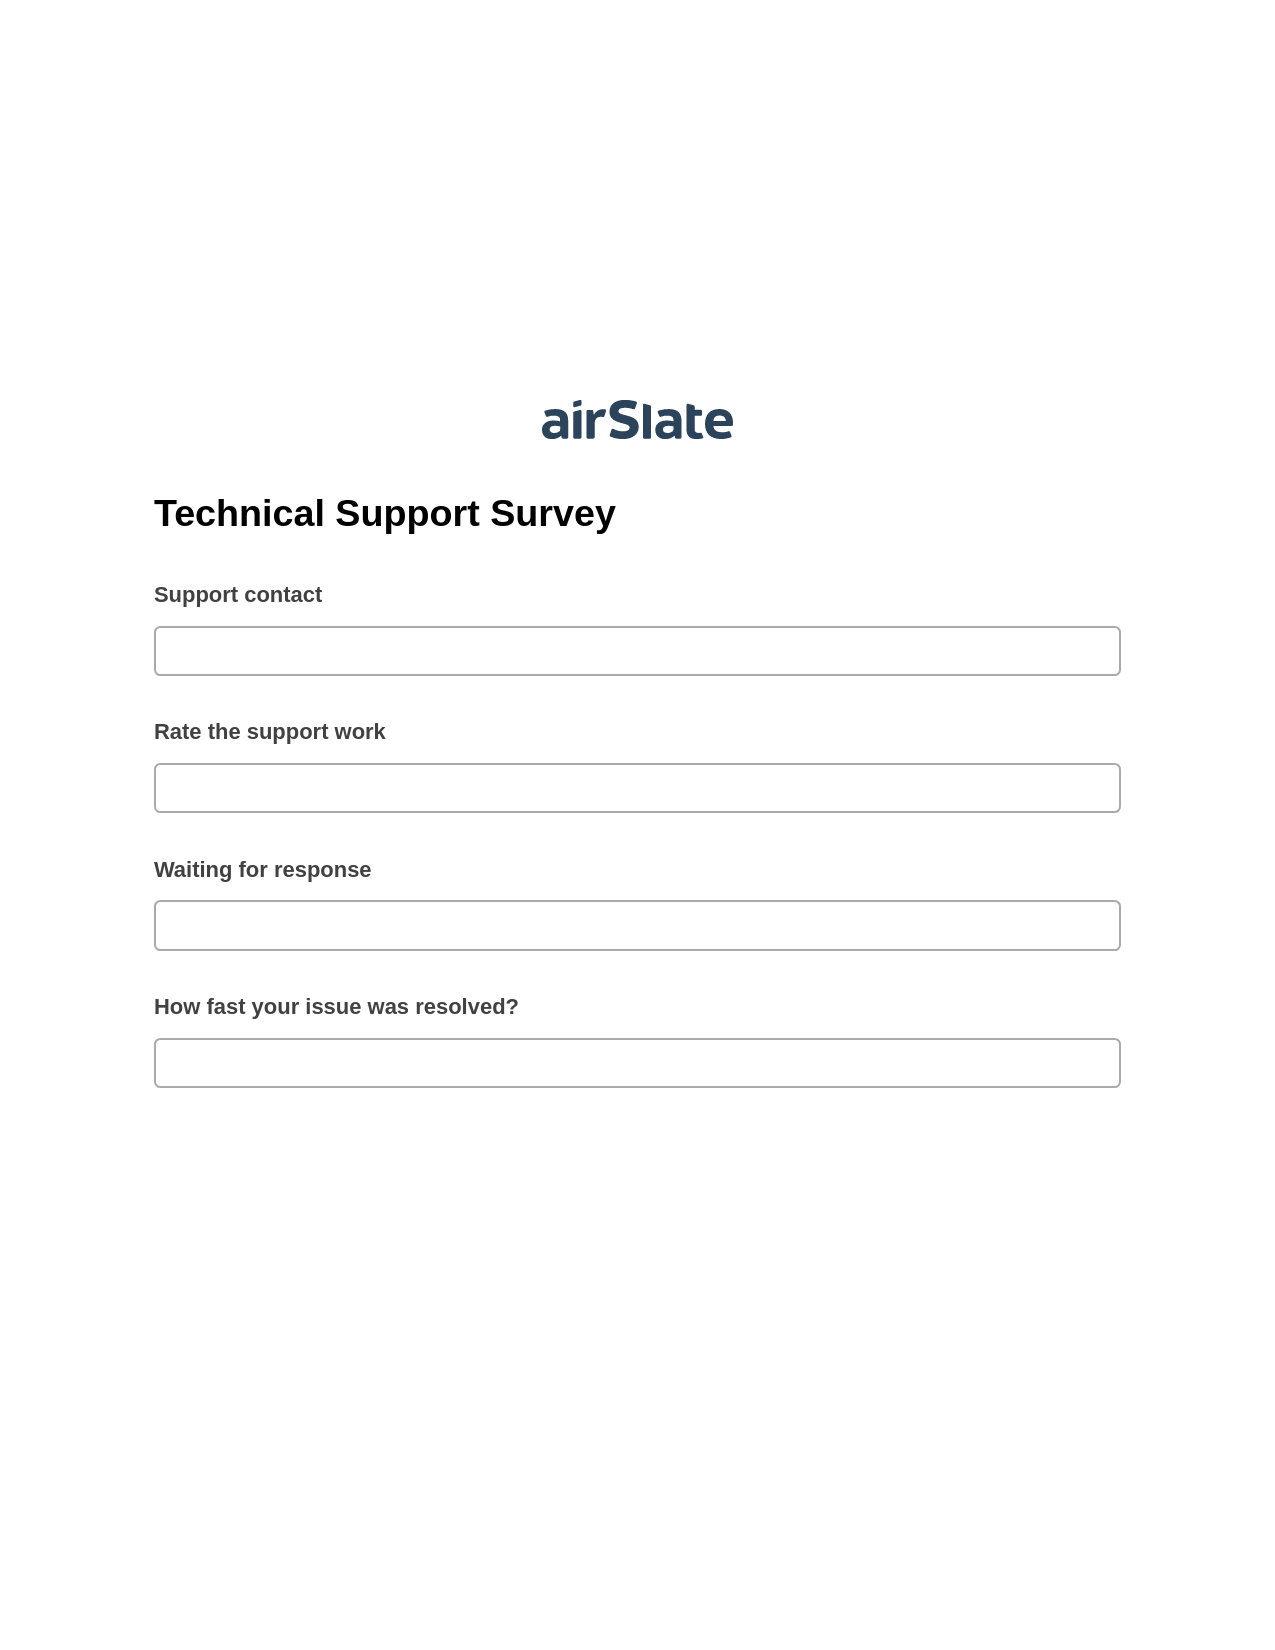 Technical Support Survey Pre-fill Dropdowns from CSV file Bot, Update NetSuite Record Bot, Email Notification Postfinish Bot